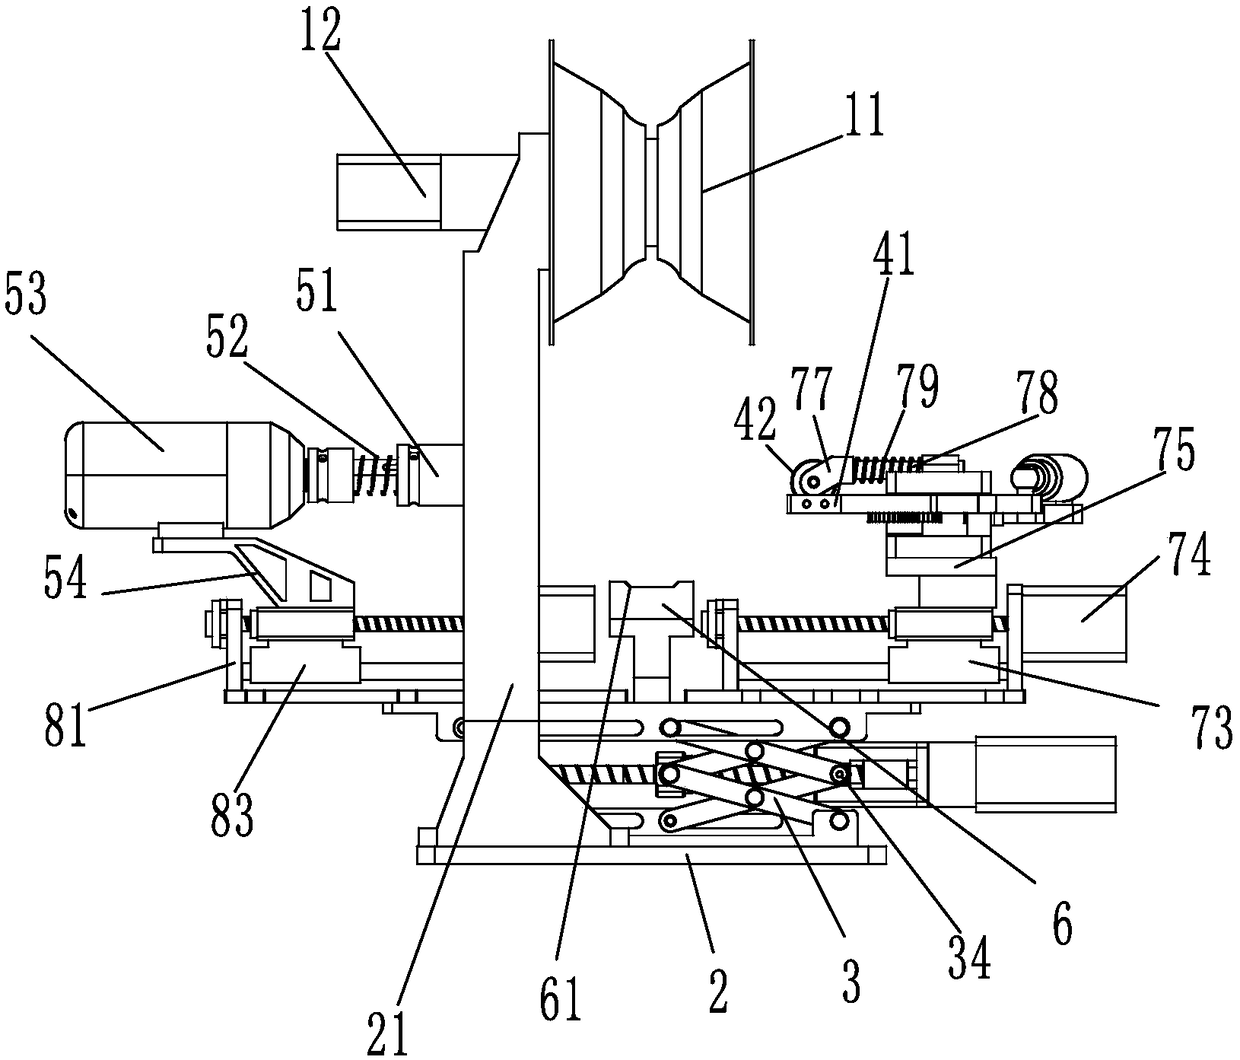 Hinged damper disassembly and assembly device and method